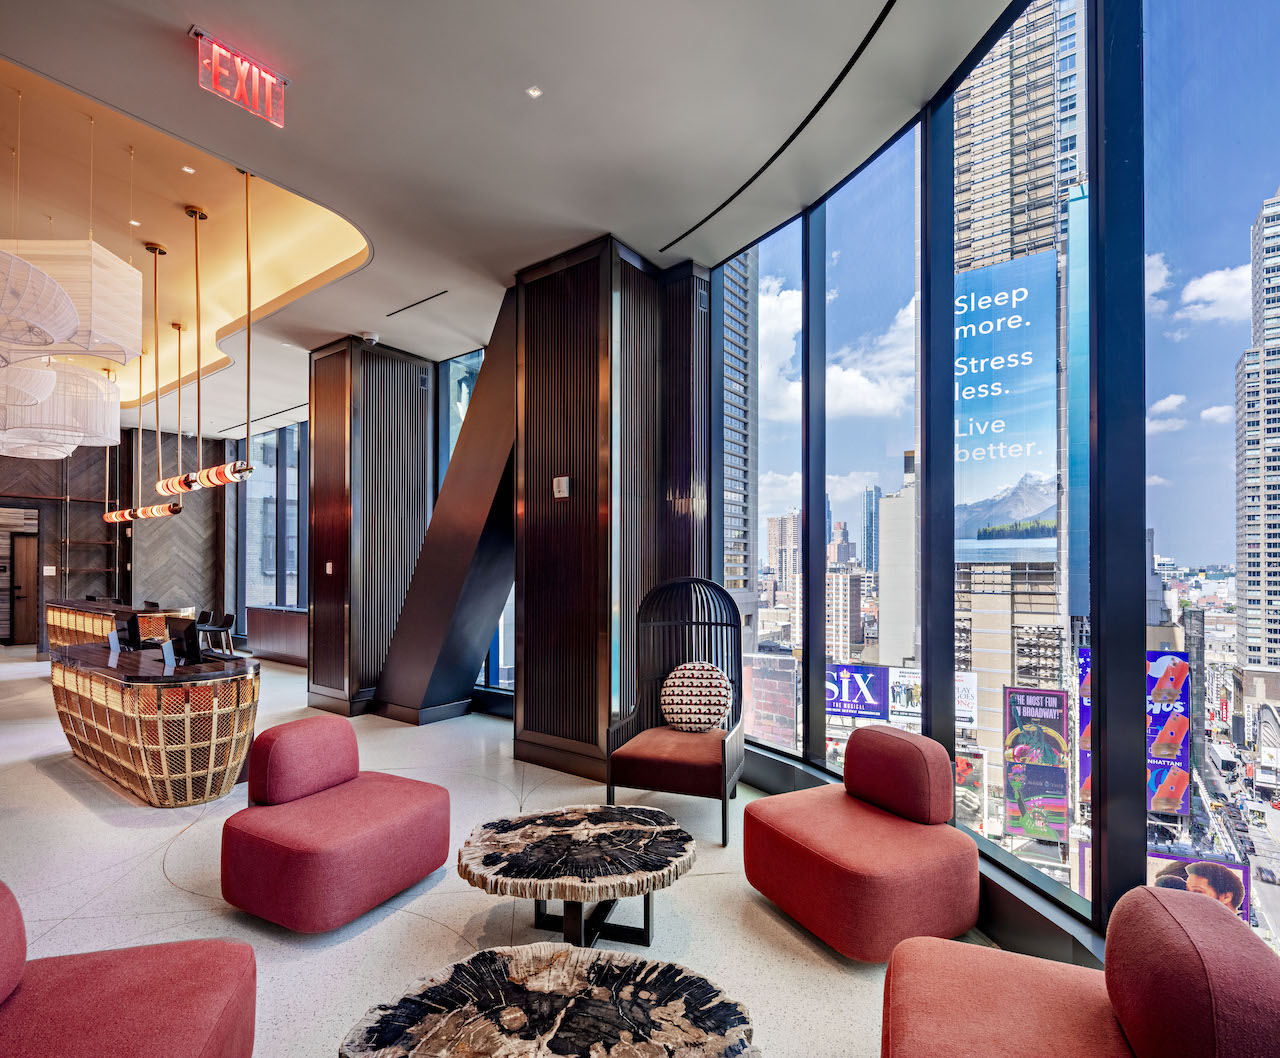 Hilton has opened the 661-room Tempo by Hilton Times Square, the first hotel from Hilton's newest stylish and contemporary lifestyle brand.